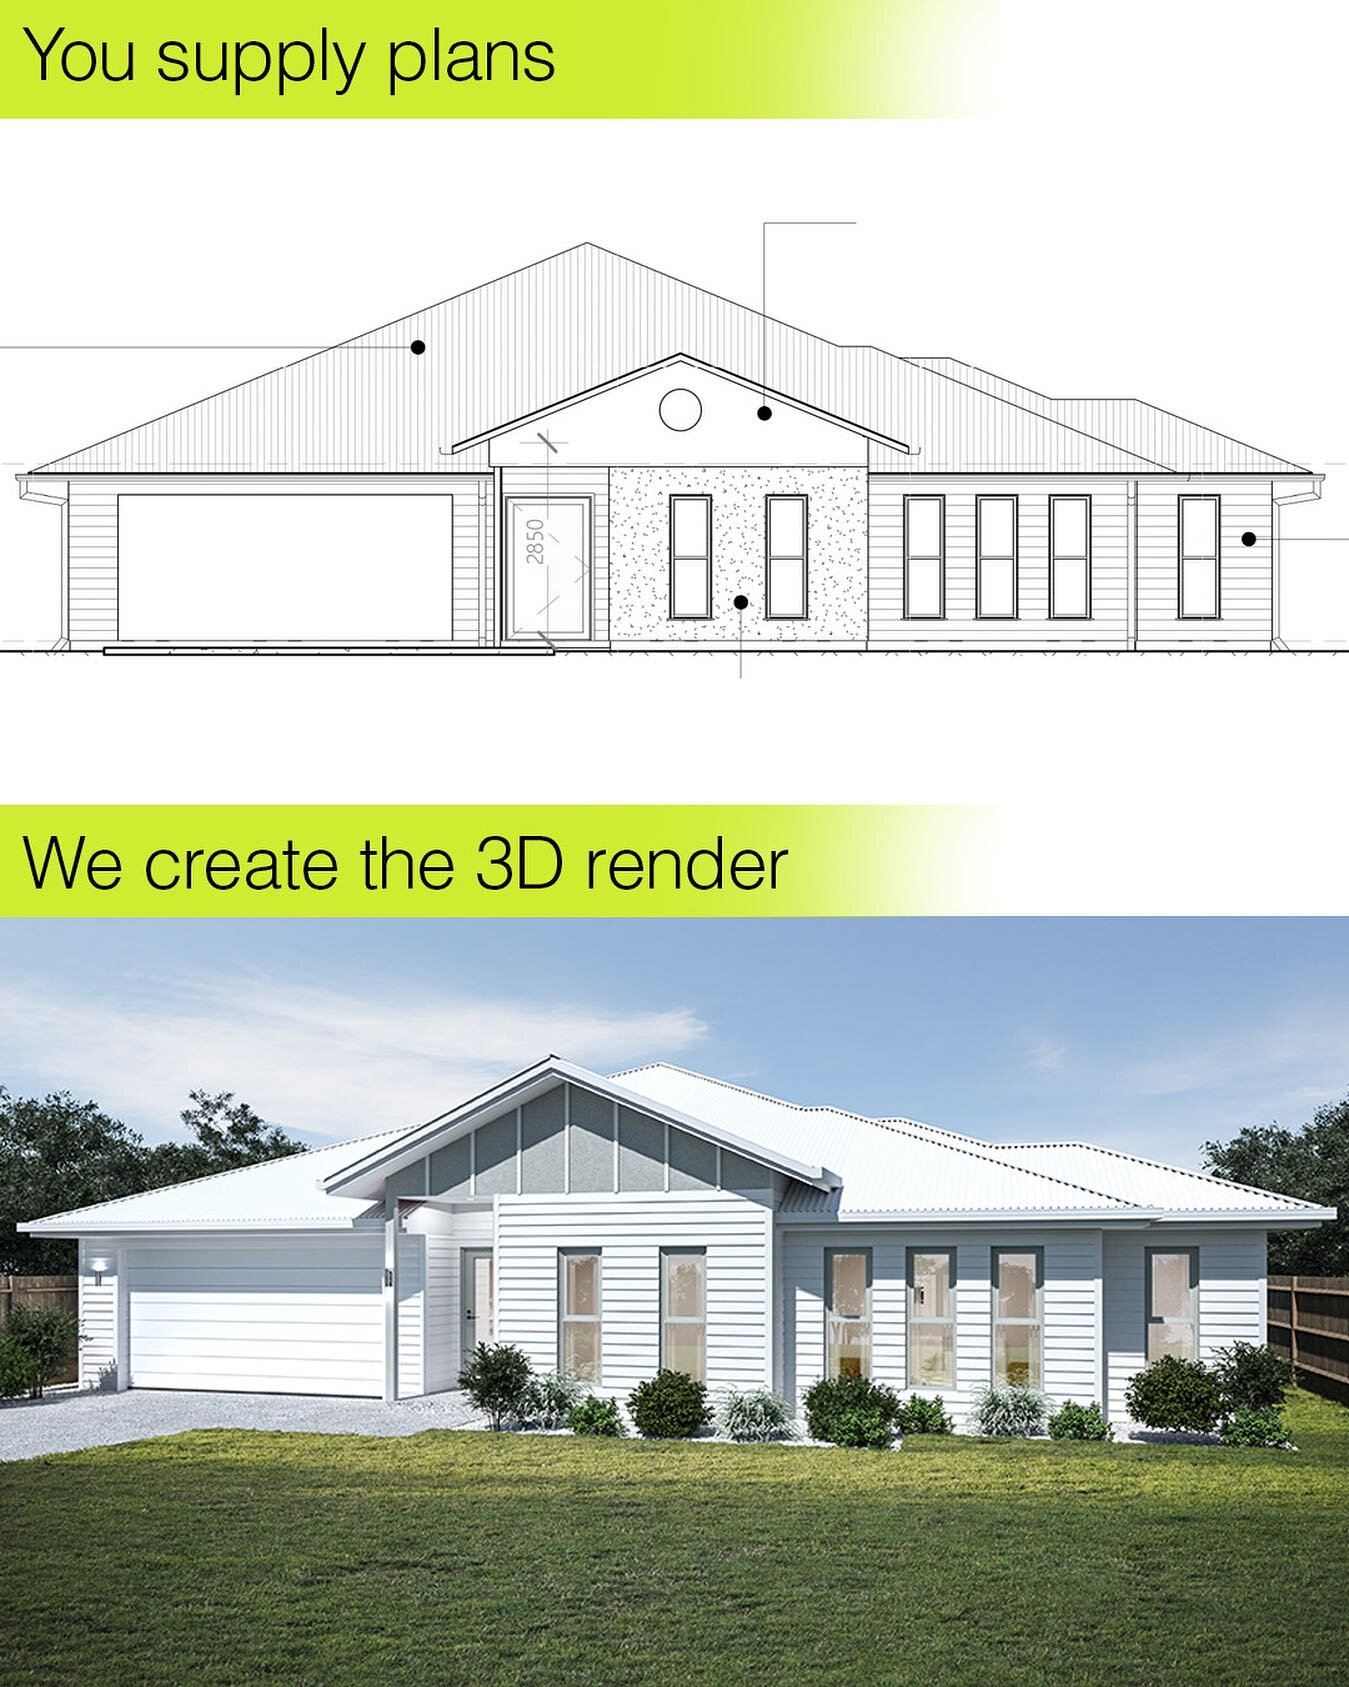 Turn mundane plans into captivating 3D Renders, FREE Color Floor Plan, from $300, 24hr Turnaround.

Plans ready? Email the PDF for instant quotation: studio@thecampaignco.com.au 
Prefer to chat?
We can talk now: 0409 861 401

#3drender #artistimpress